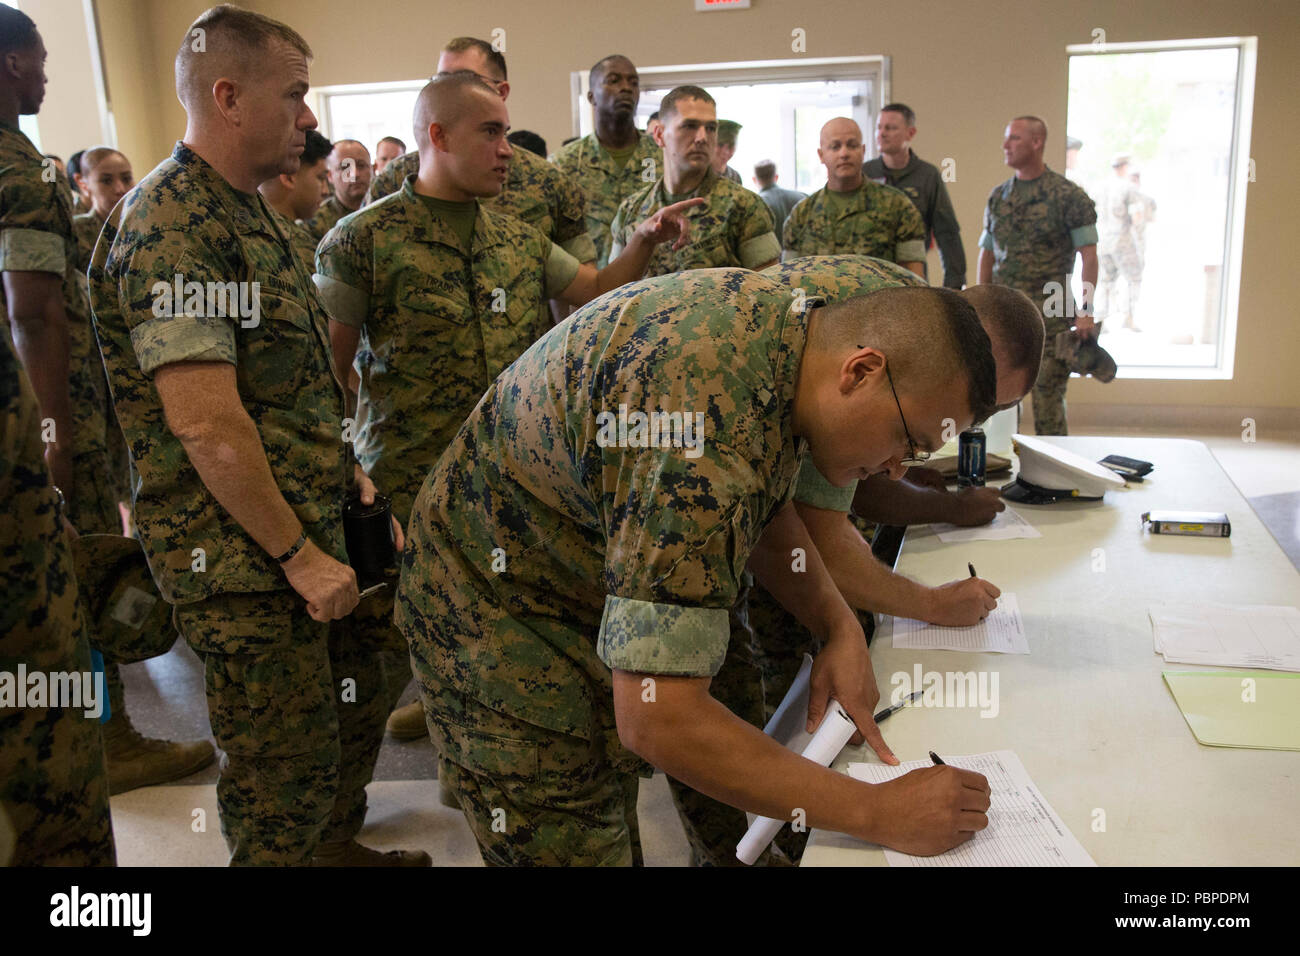 U.S. Marines stationed at Marine Corps Base Camp Pendleton, sign check-in rosters for the Manpower Management Enlisted Assignment Executive Overview Brief at MCB Camp Pendleton, California, July 19, 2018. The Marines that attended the brief were given a chance to meet the enlisted assignment executives and discuss the opportunities and changes that will take effect in Fiscal Year 2019. (U.S. Marine Corps photo by Lance Cpl. Drake Nickels) Stock Photo